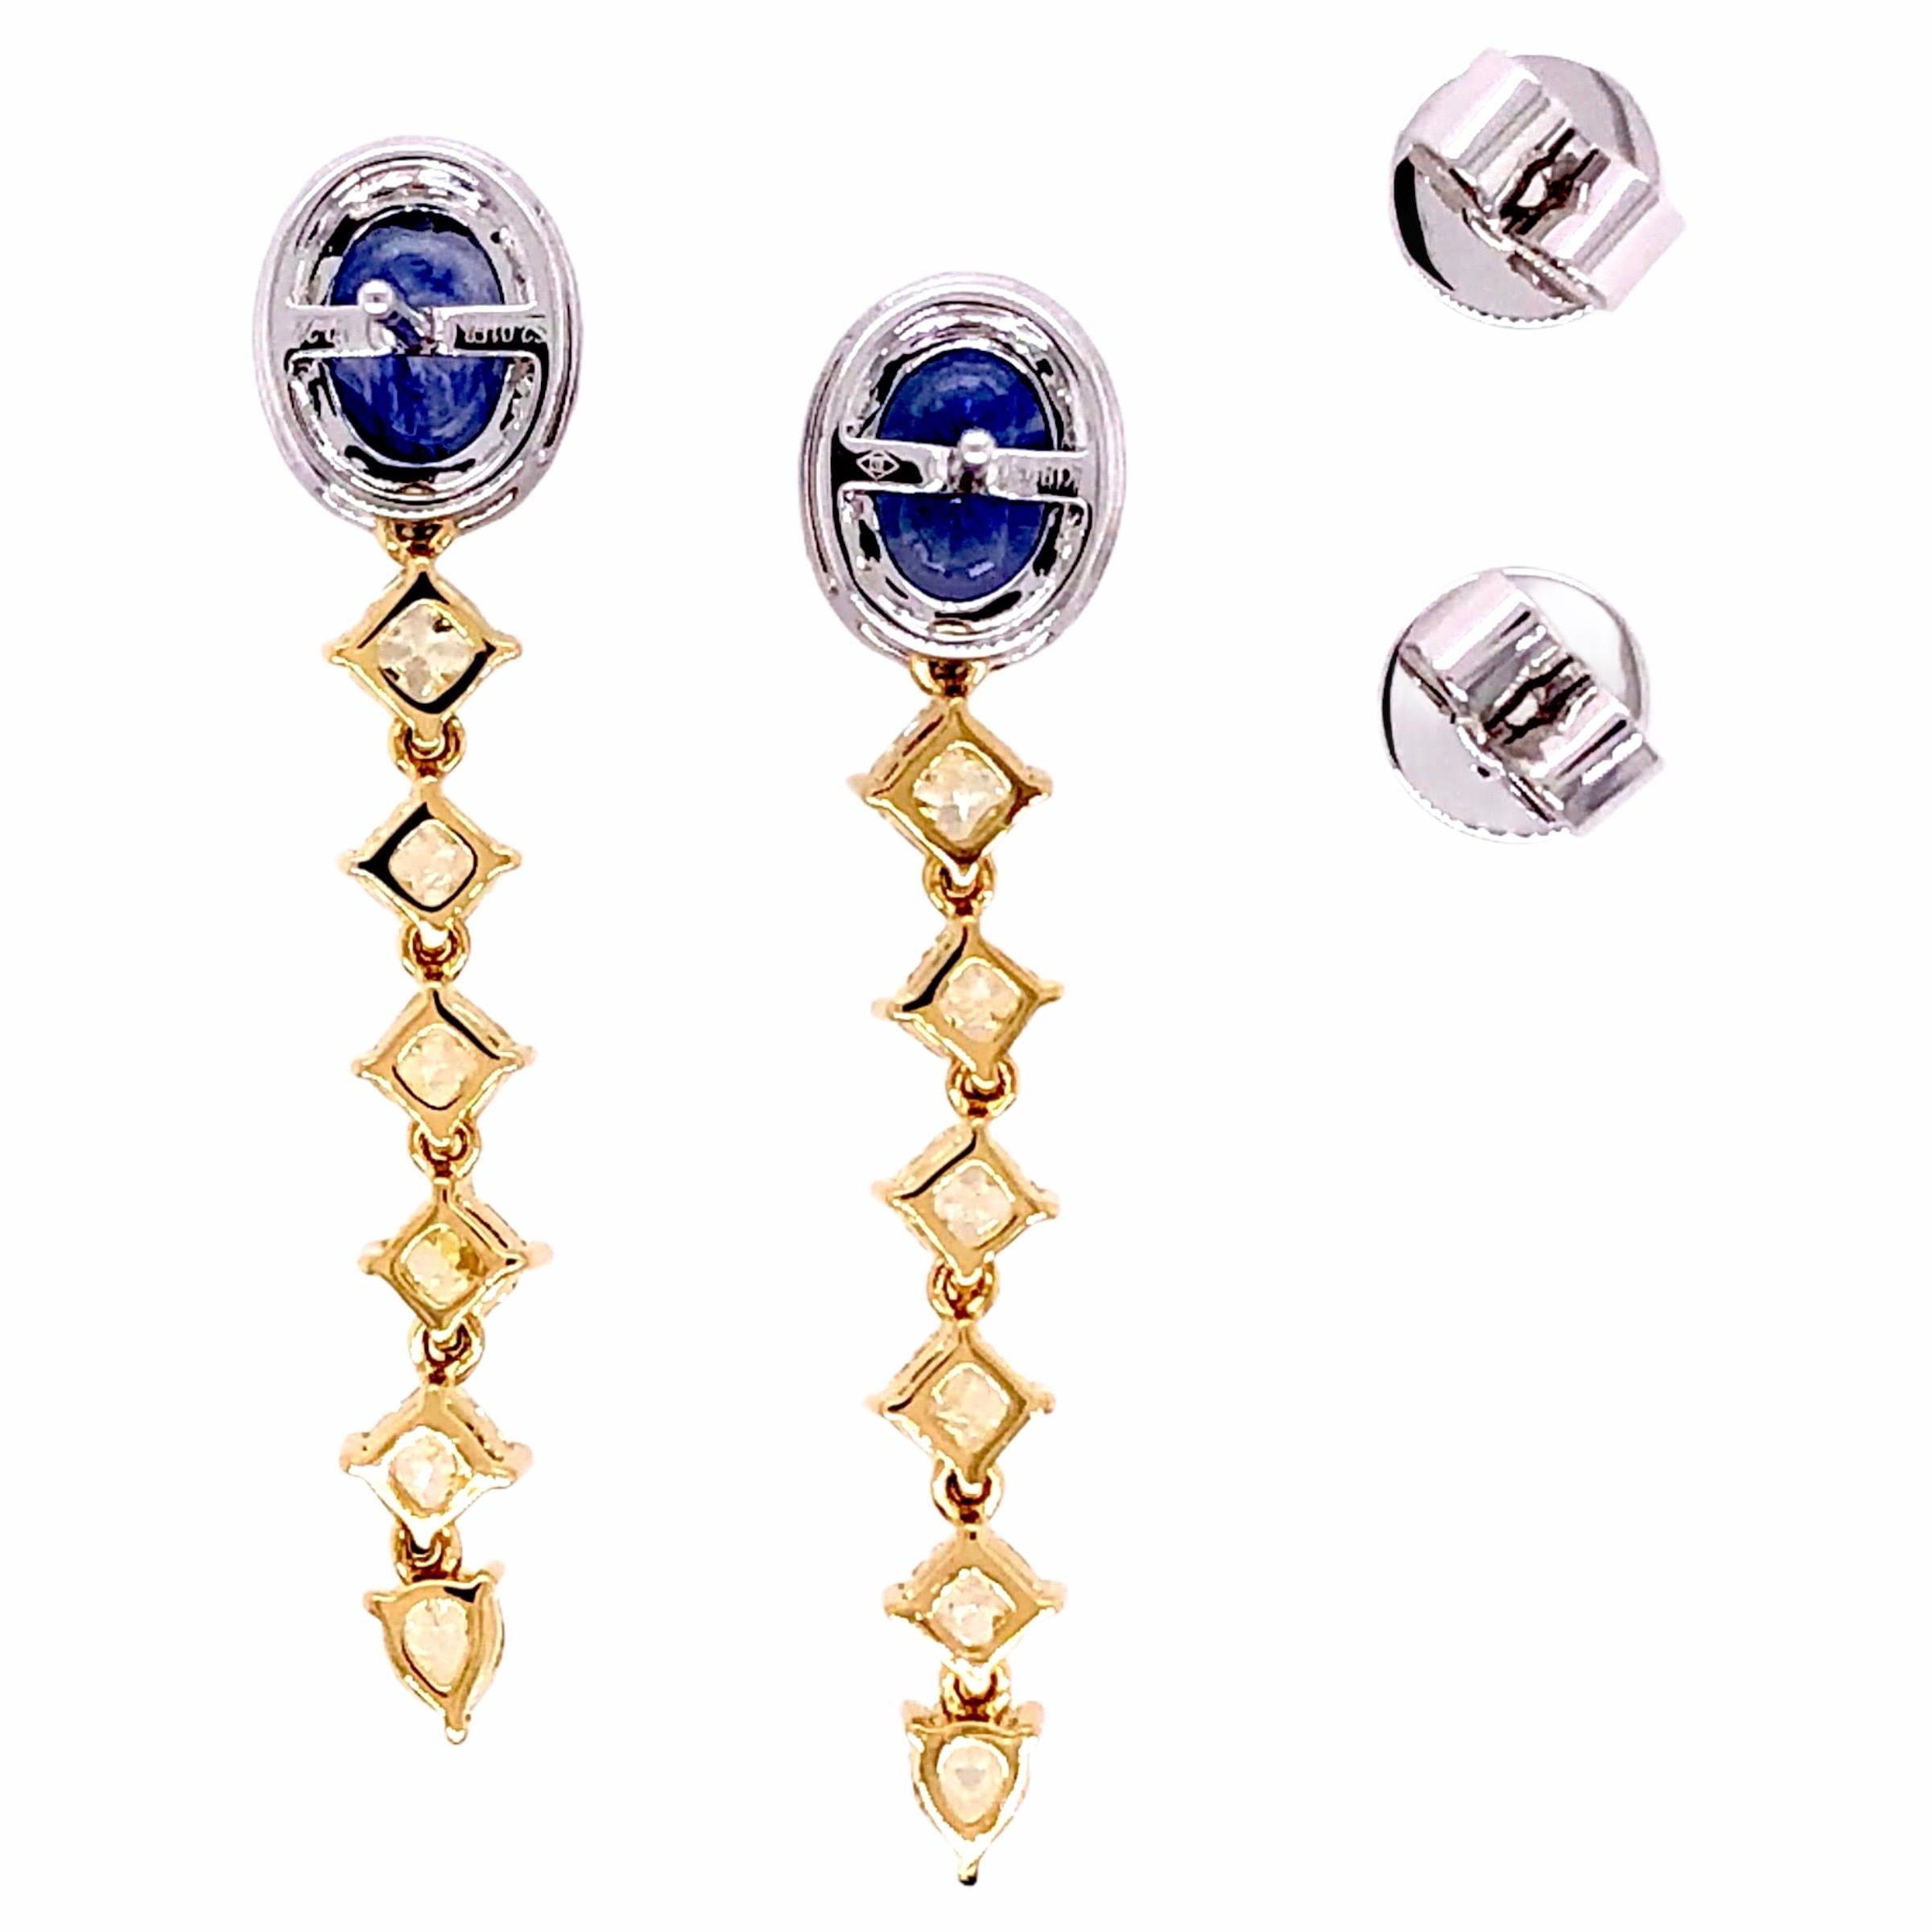 PARIS Craft House 2.01ct Blue Sapphire Yellow Diamond Earrings in 18 Karat White/Yellow Gold.

- 2 Oval-cut Blue Sapphires/2.01ct
- 12 Fancy-cut Yellow Diamonds/2.35ct
- 36 Round Diamonds/0.22ct
- 18K White/Yellow Gold

Designed and crafted at PARIS